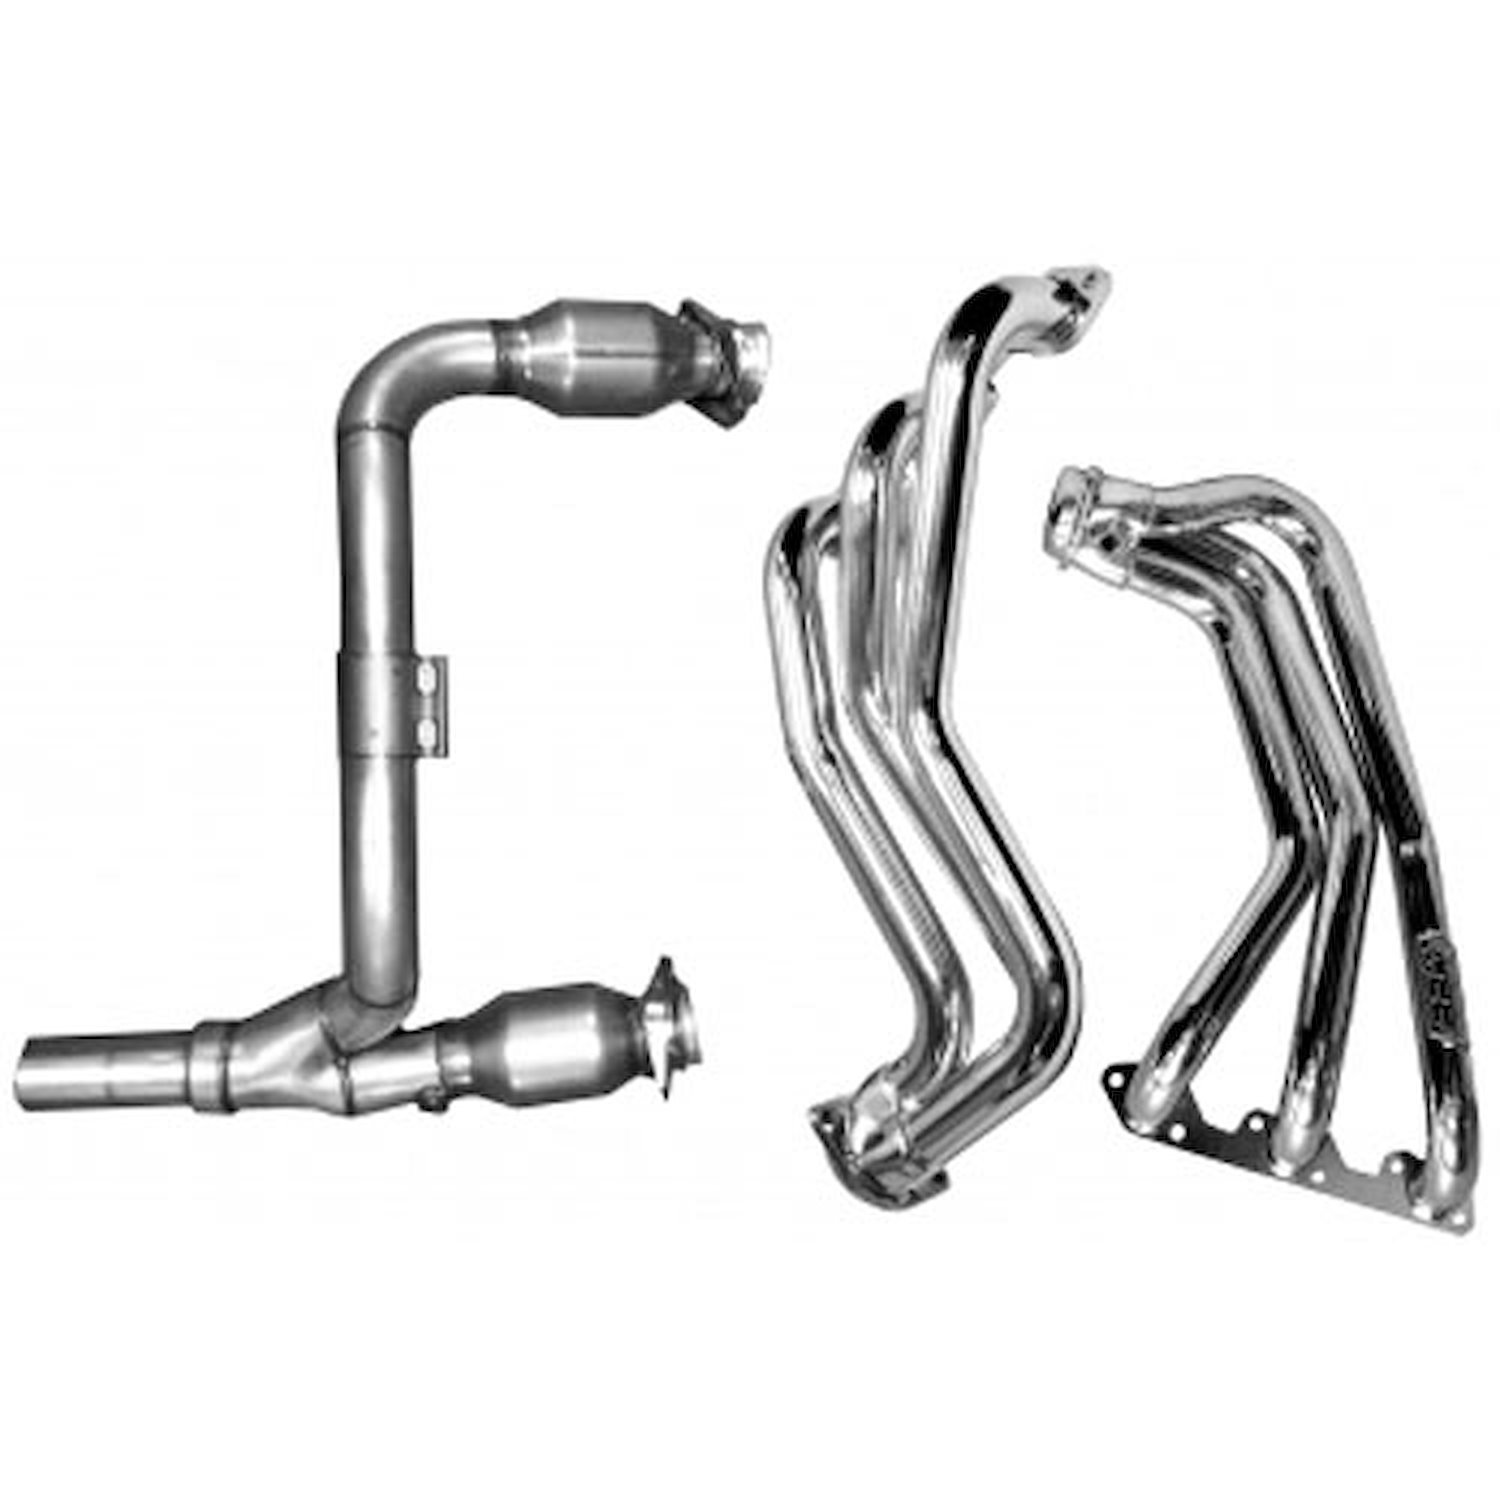 Long Tube Exhaust Headers & Y Pipe System 2007-11 Jeep Wrangler 3.8L V6